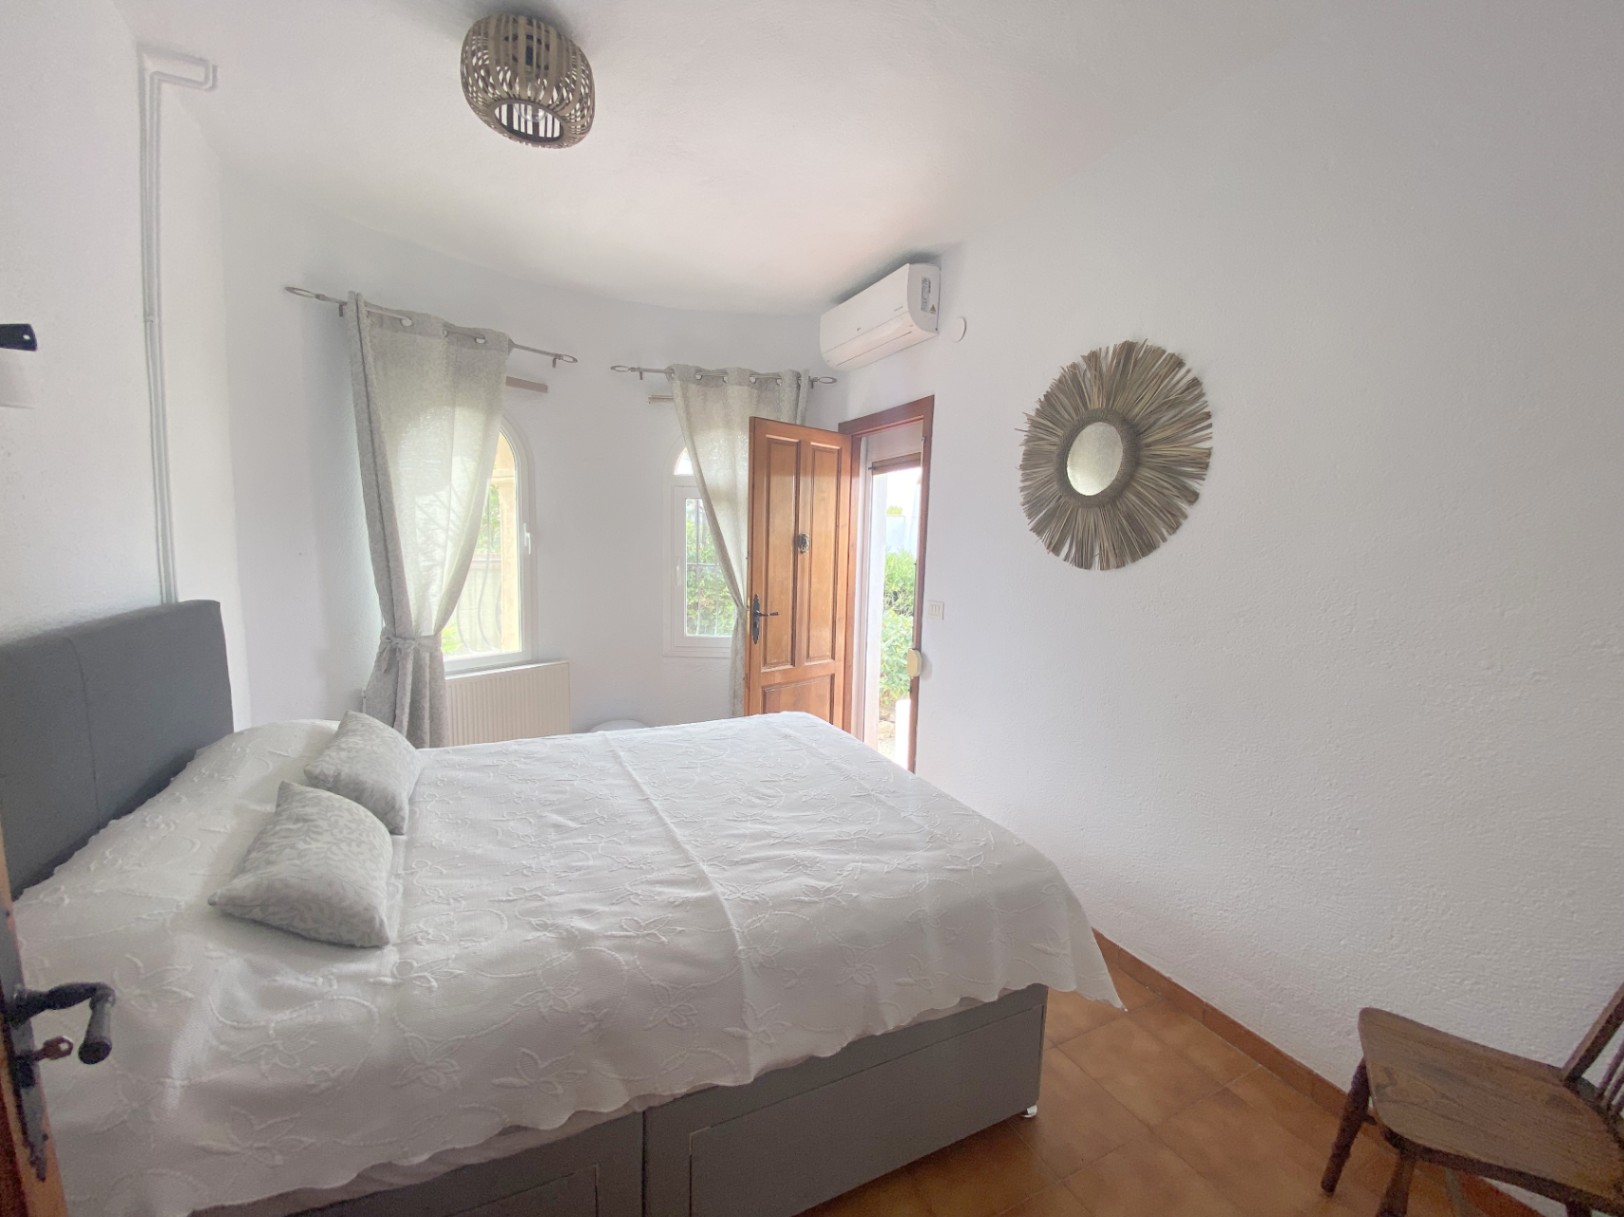 VILLA 5 MINUTES FROM THE ARENAL BEACH FOR WINTER LET